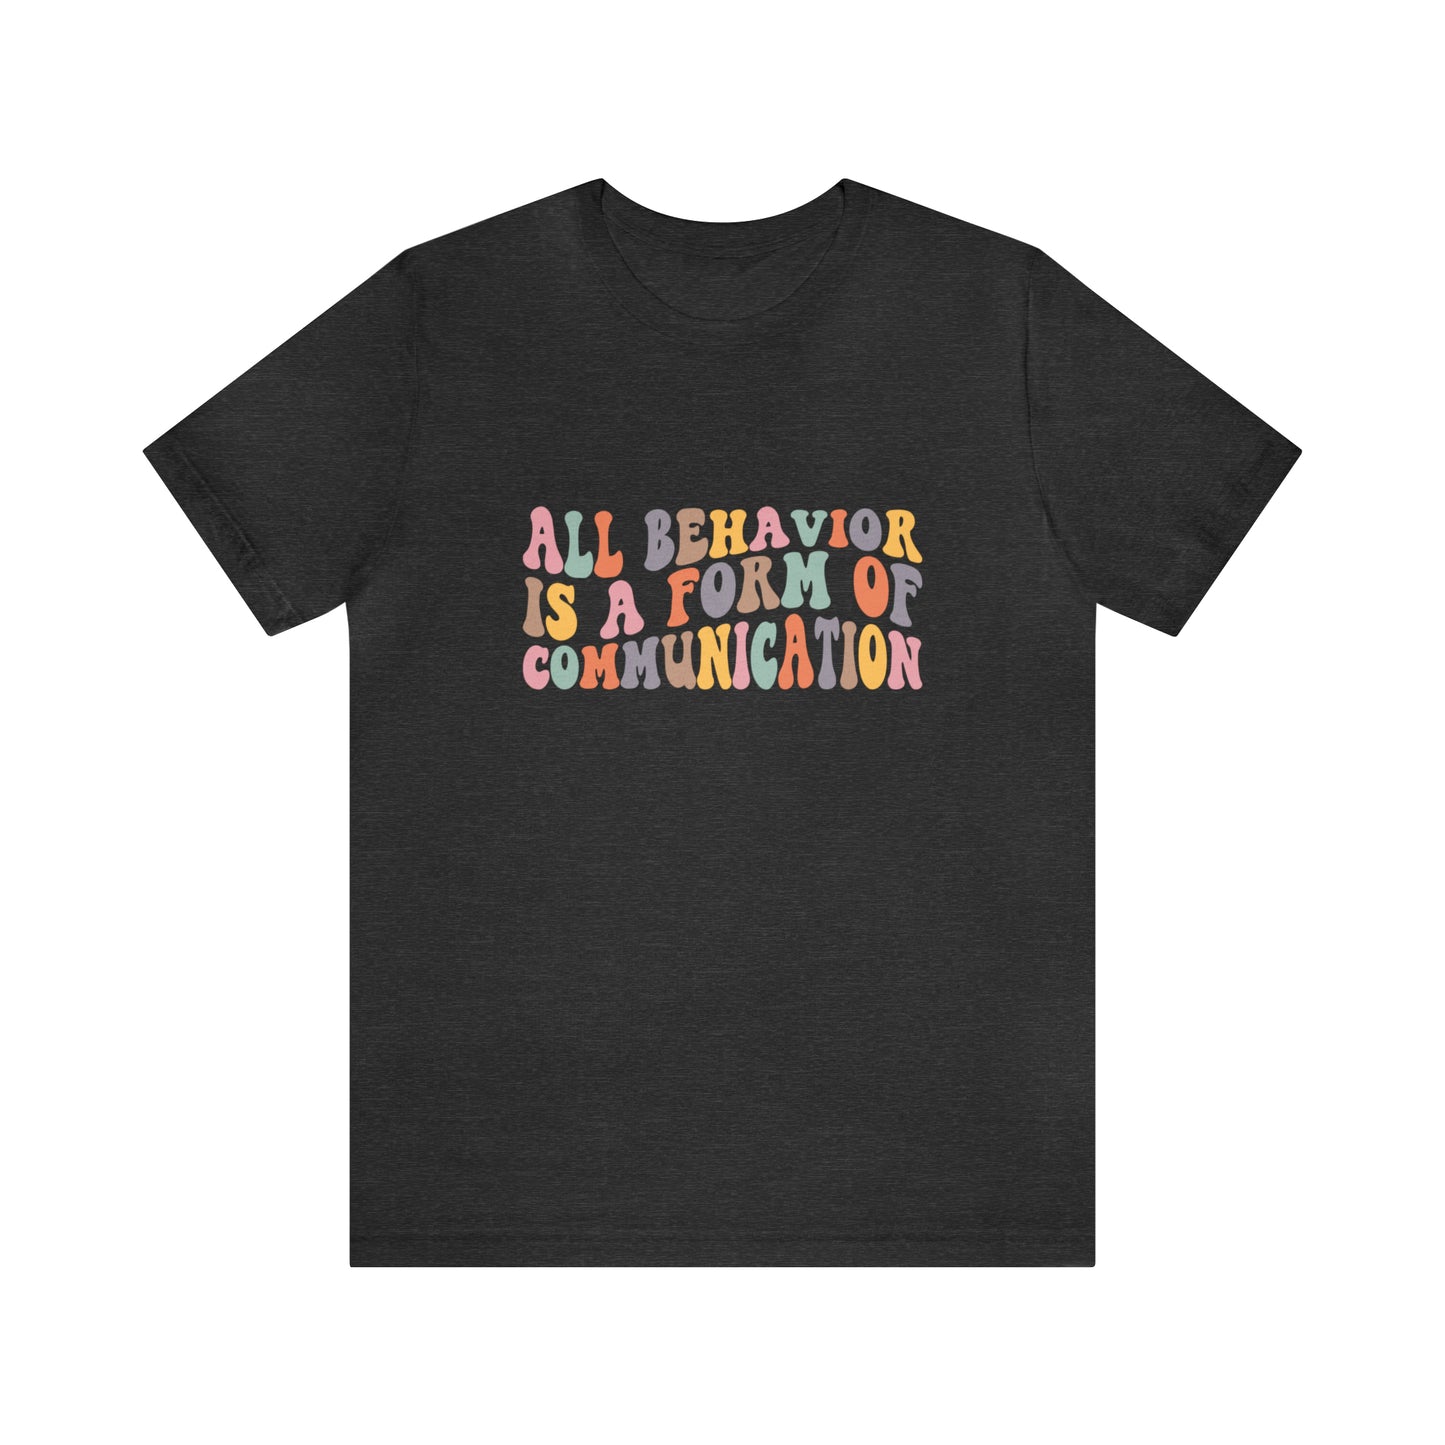 All behavior is a form of communication women's Short Sleeve Tee